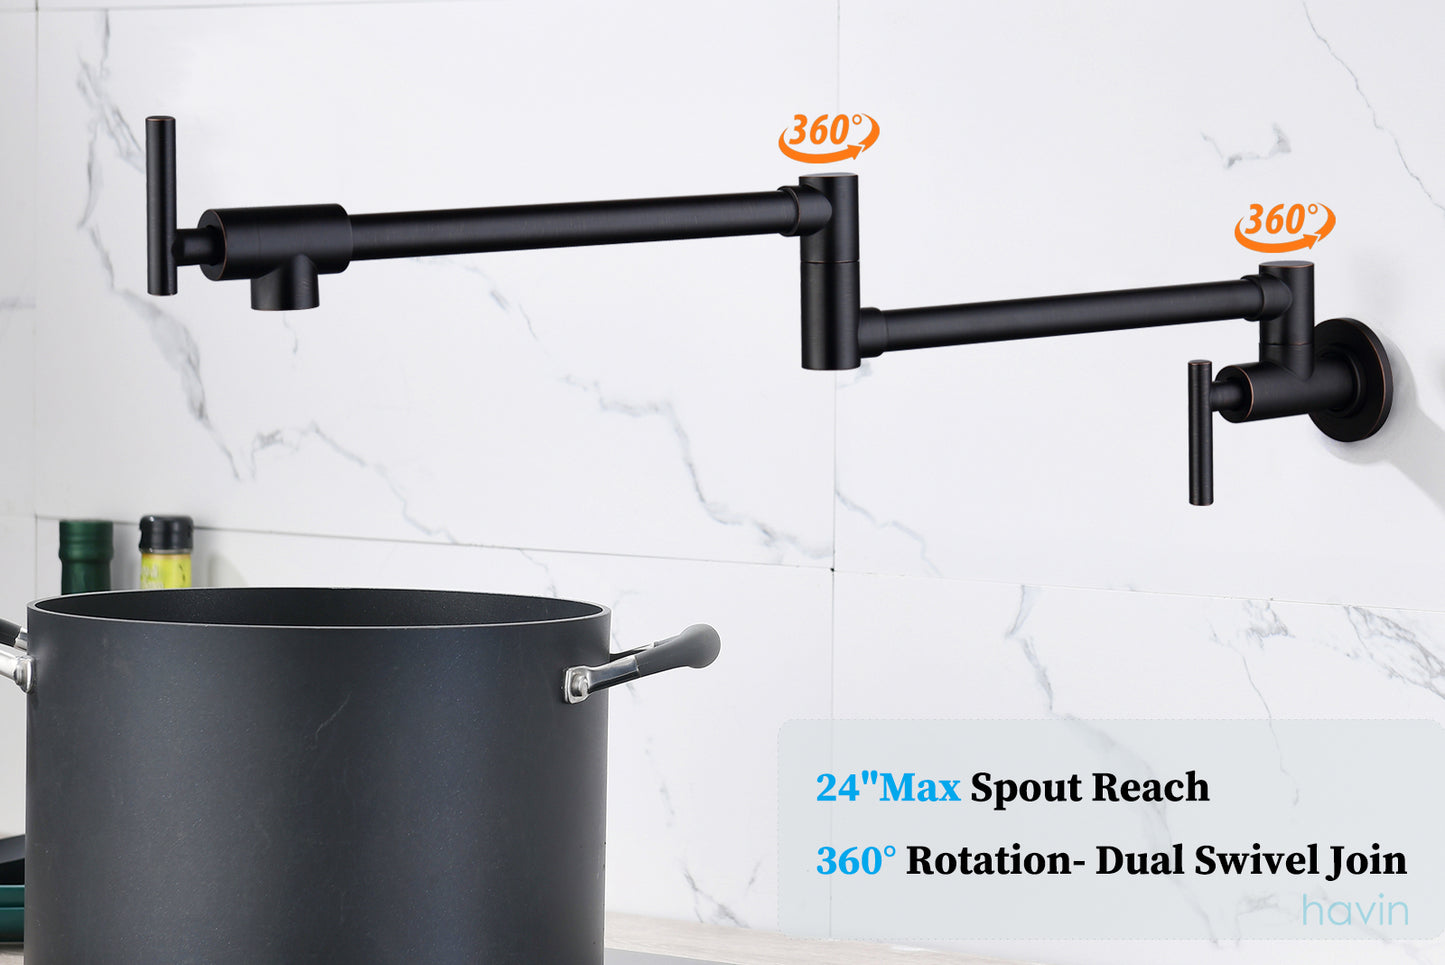 Havin Brass Pot Filler ORB,Wall Mount Commercial Pot Filler Faucet,Brass Copper Material Kitchen Folding Faucet,Coffee Machine Faucet with Stretchable Double Joint Swing Arms,Style A,Oil Rubbed Bronze